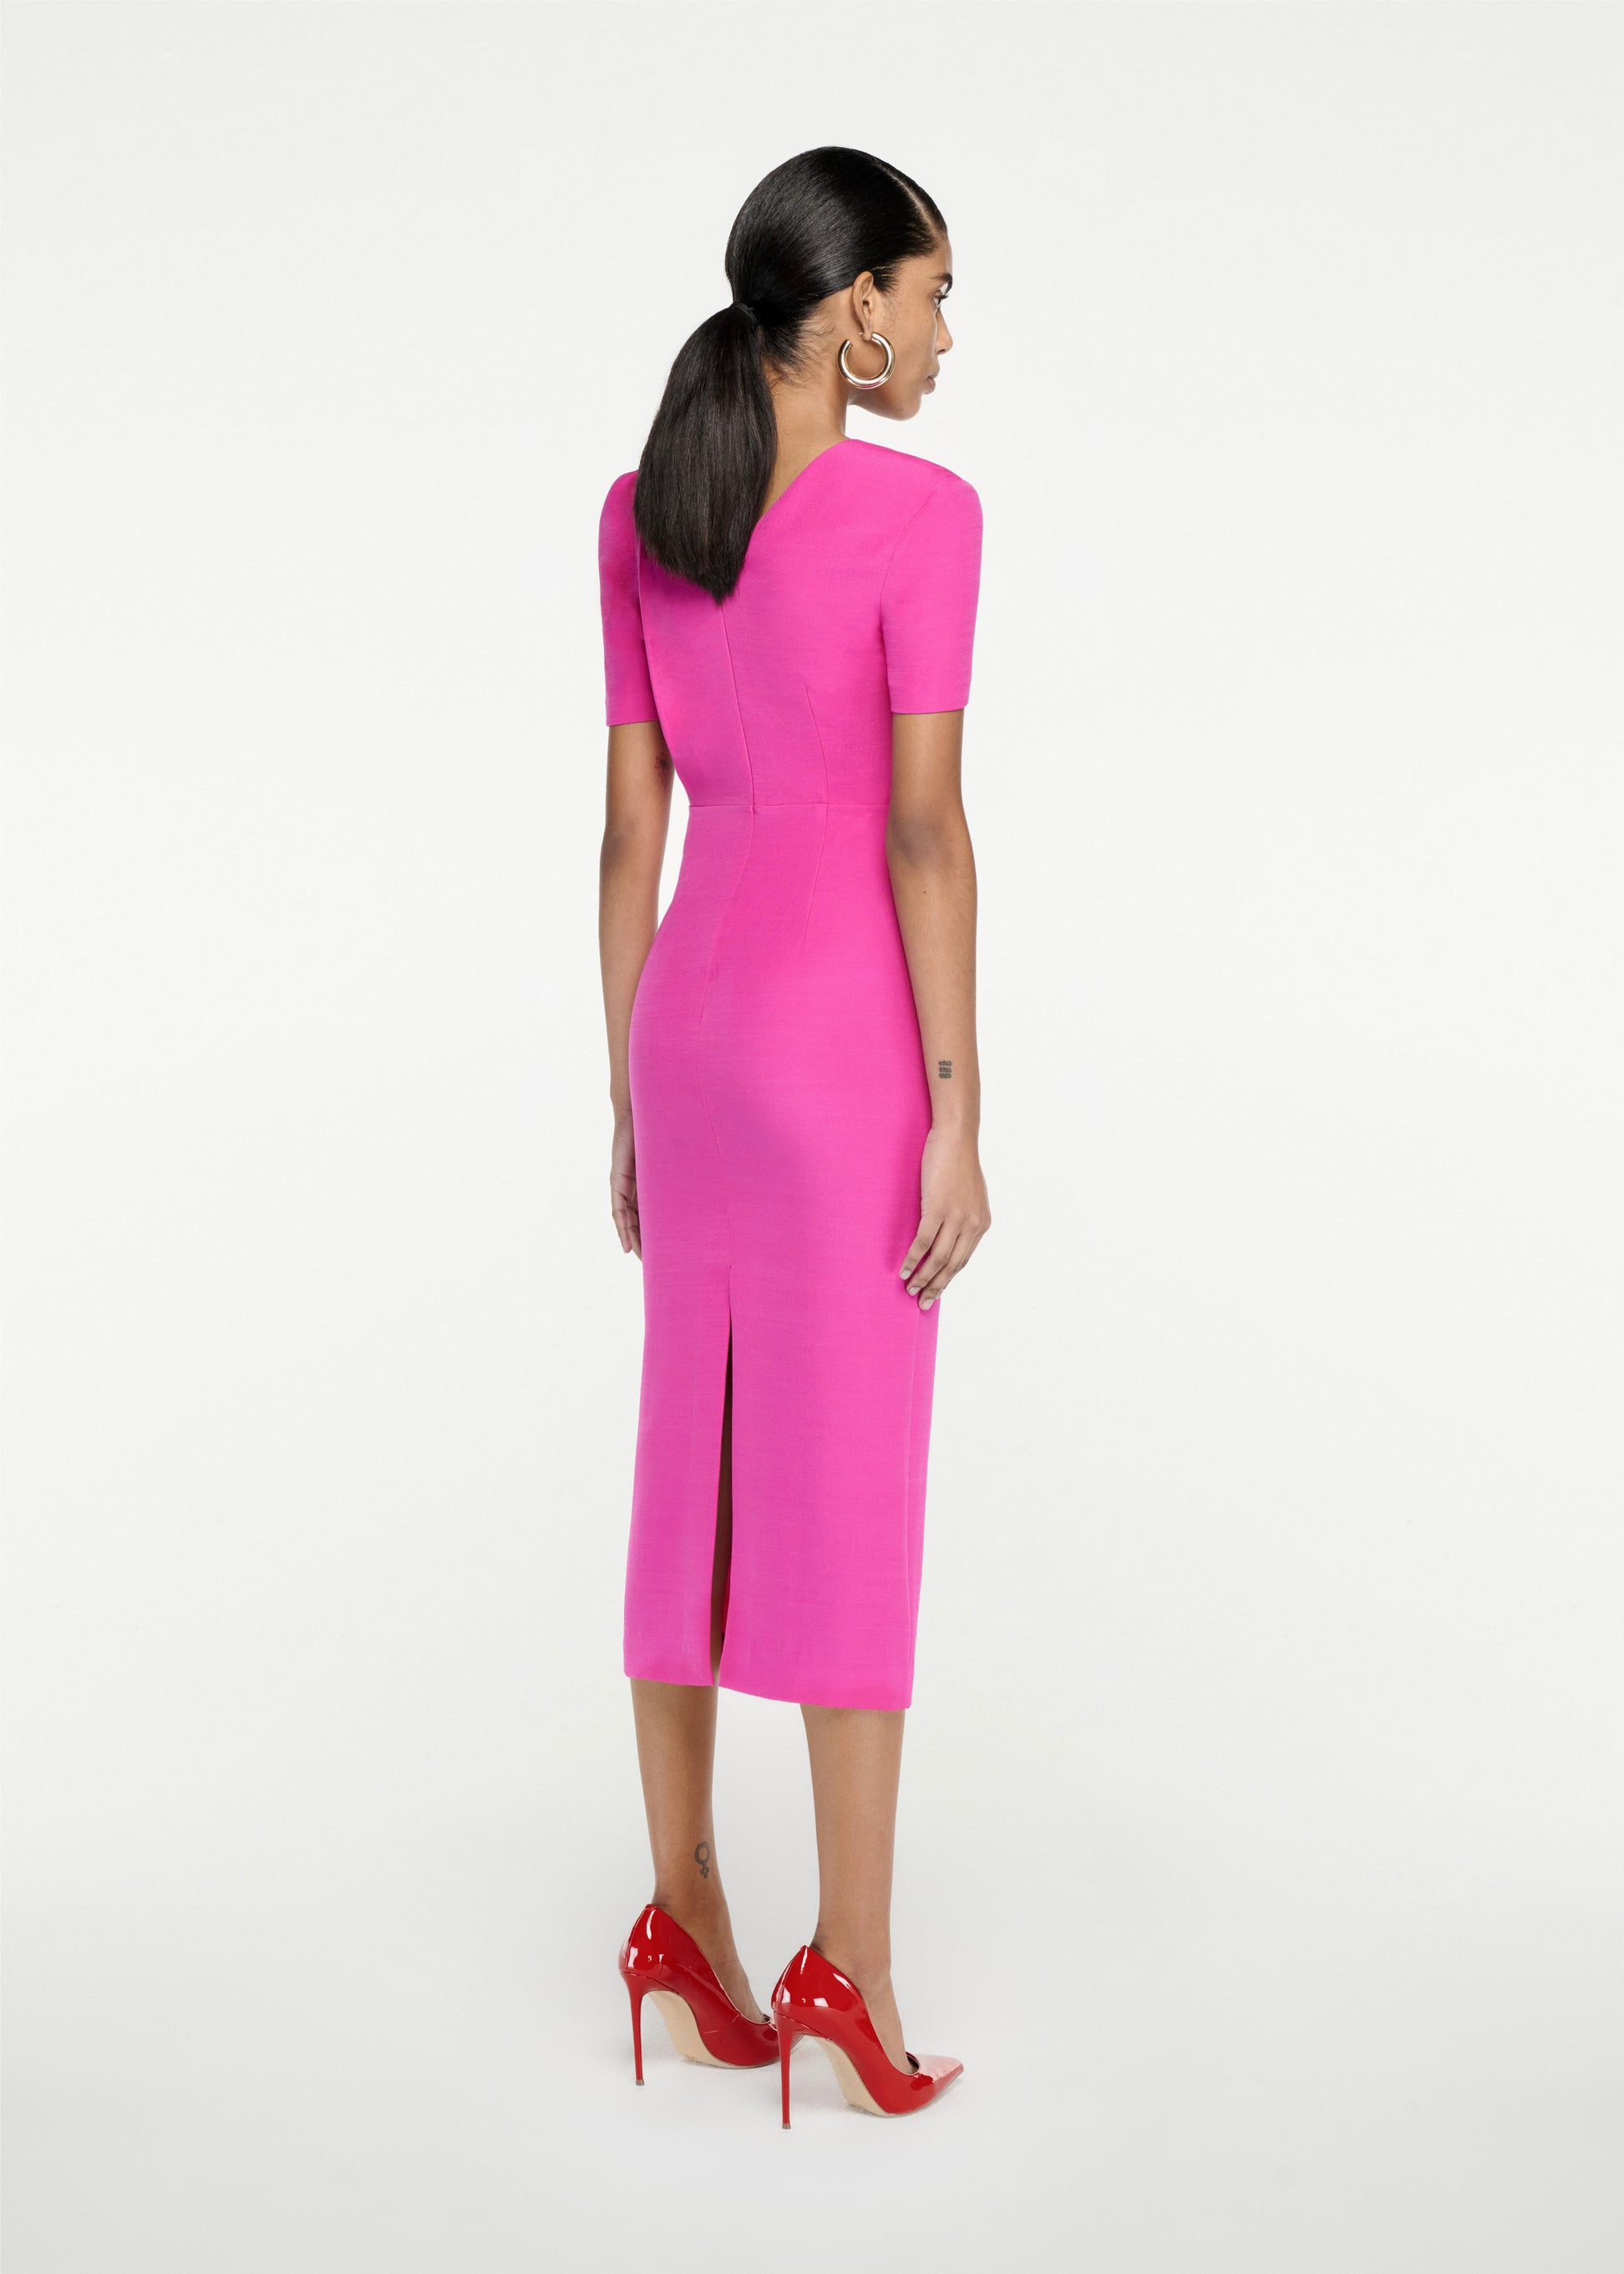 The back of a woman wearing the Short Sleeve Silk Wool Midi Dress in Pink